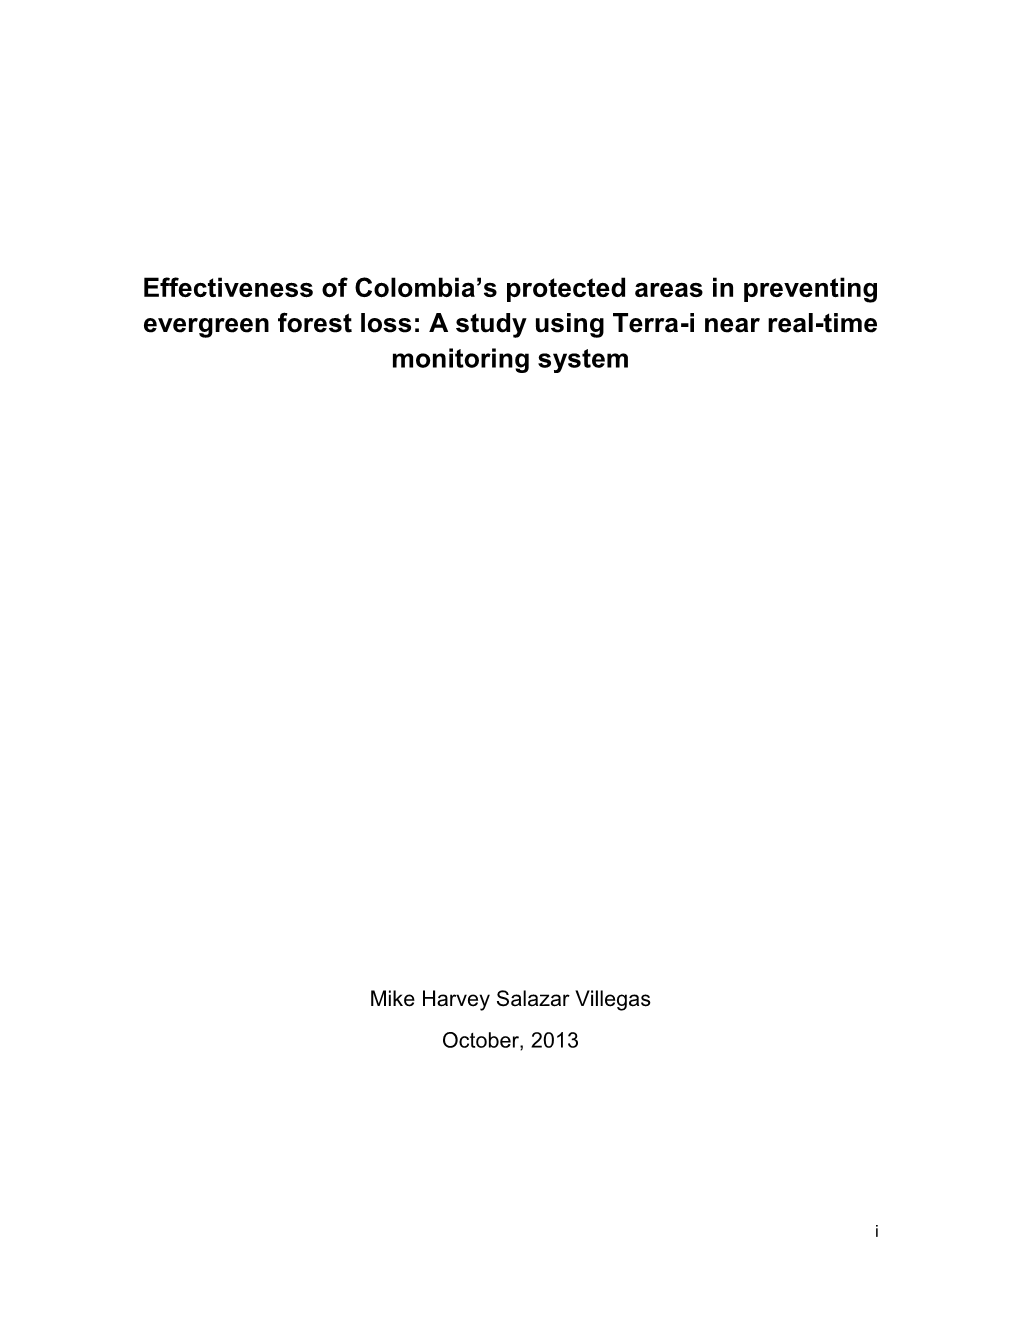 Effectiveness of Colombia's Protected Areas in Preventing Evergreen